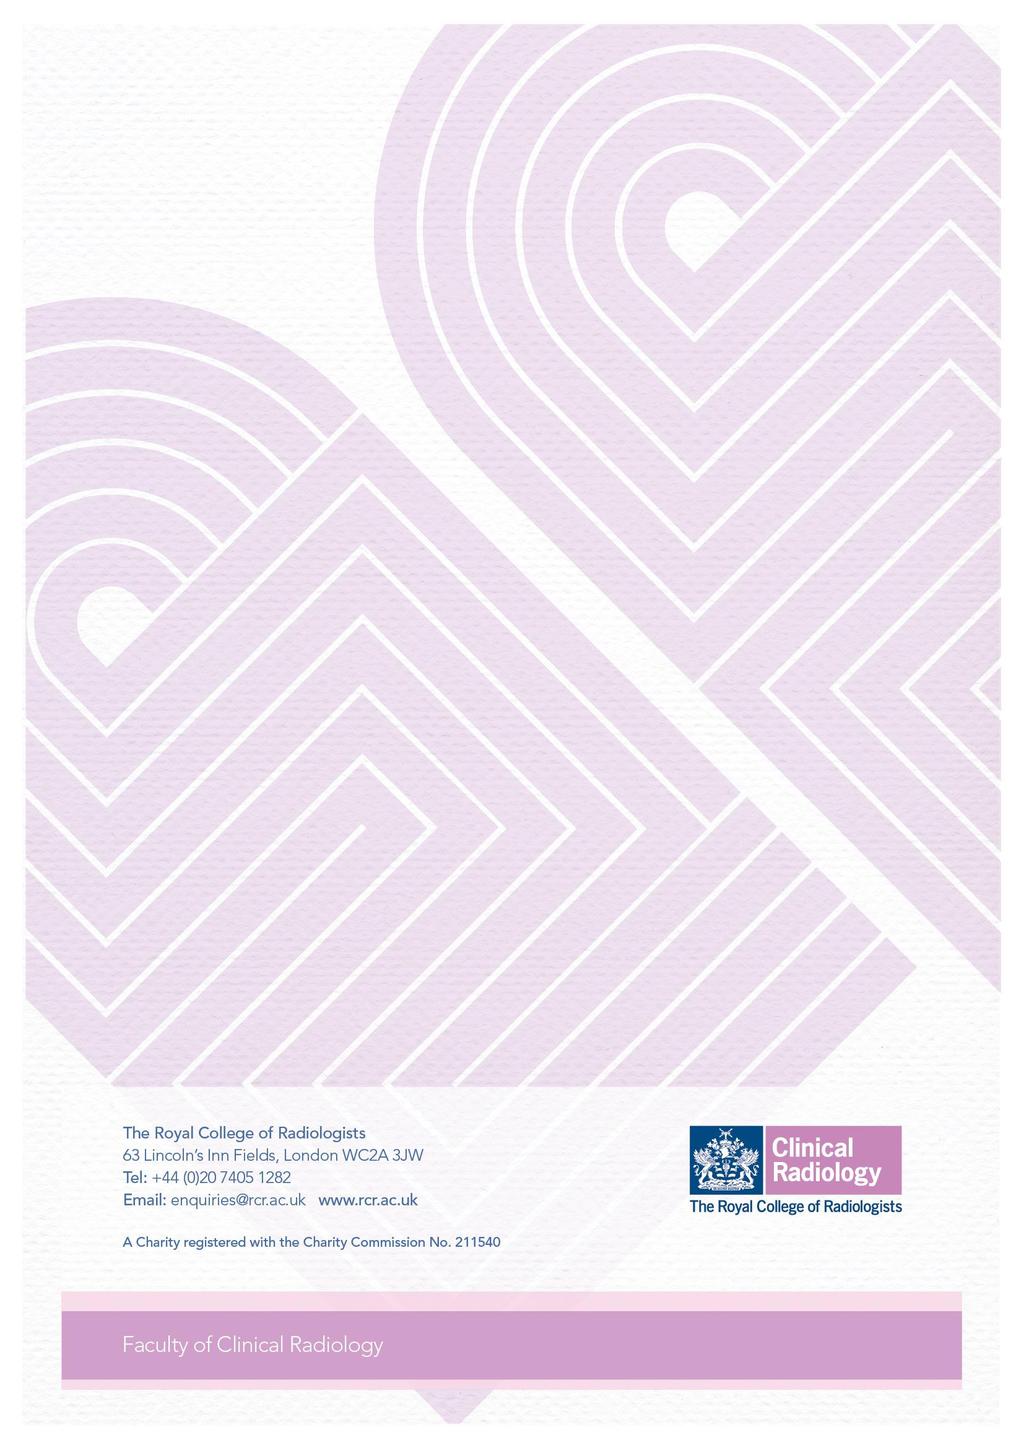 Citation details The Royal College of Radiologists. National Audit of Paediatric Radiology Services in Hospitals. London: The Royal College of Radiologists, 2015.